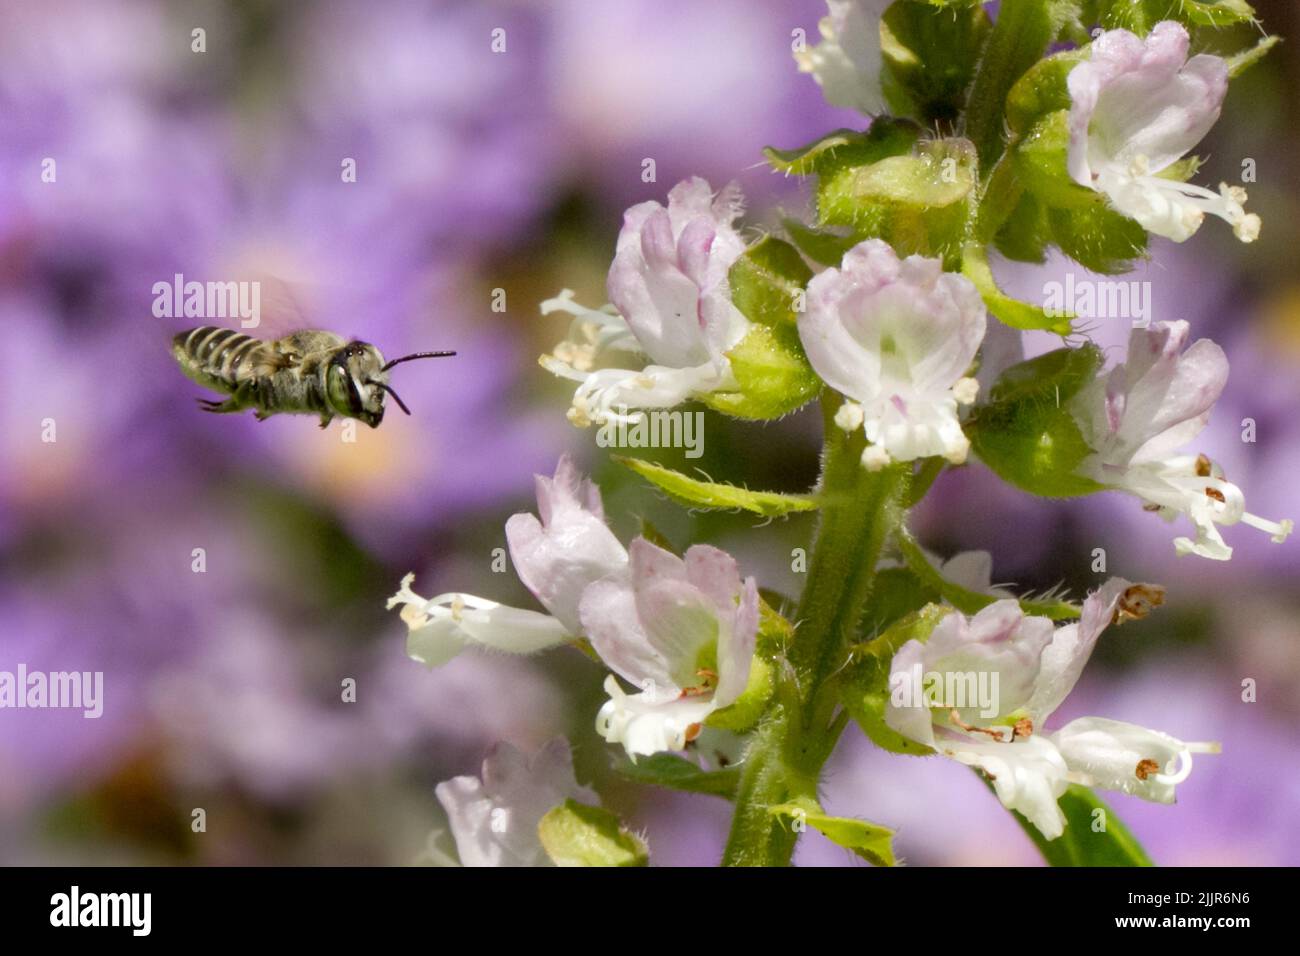 A closeup of a bee approaching the heath speedwell (Veronica officinalis) to gather pollen Stock Photo